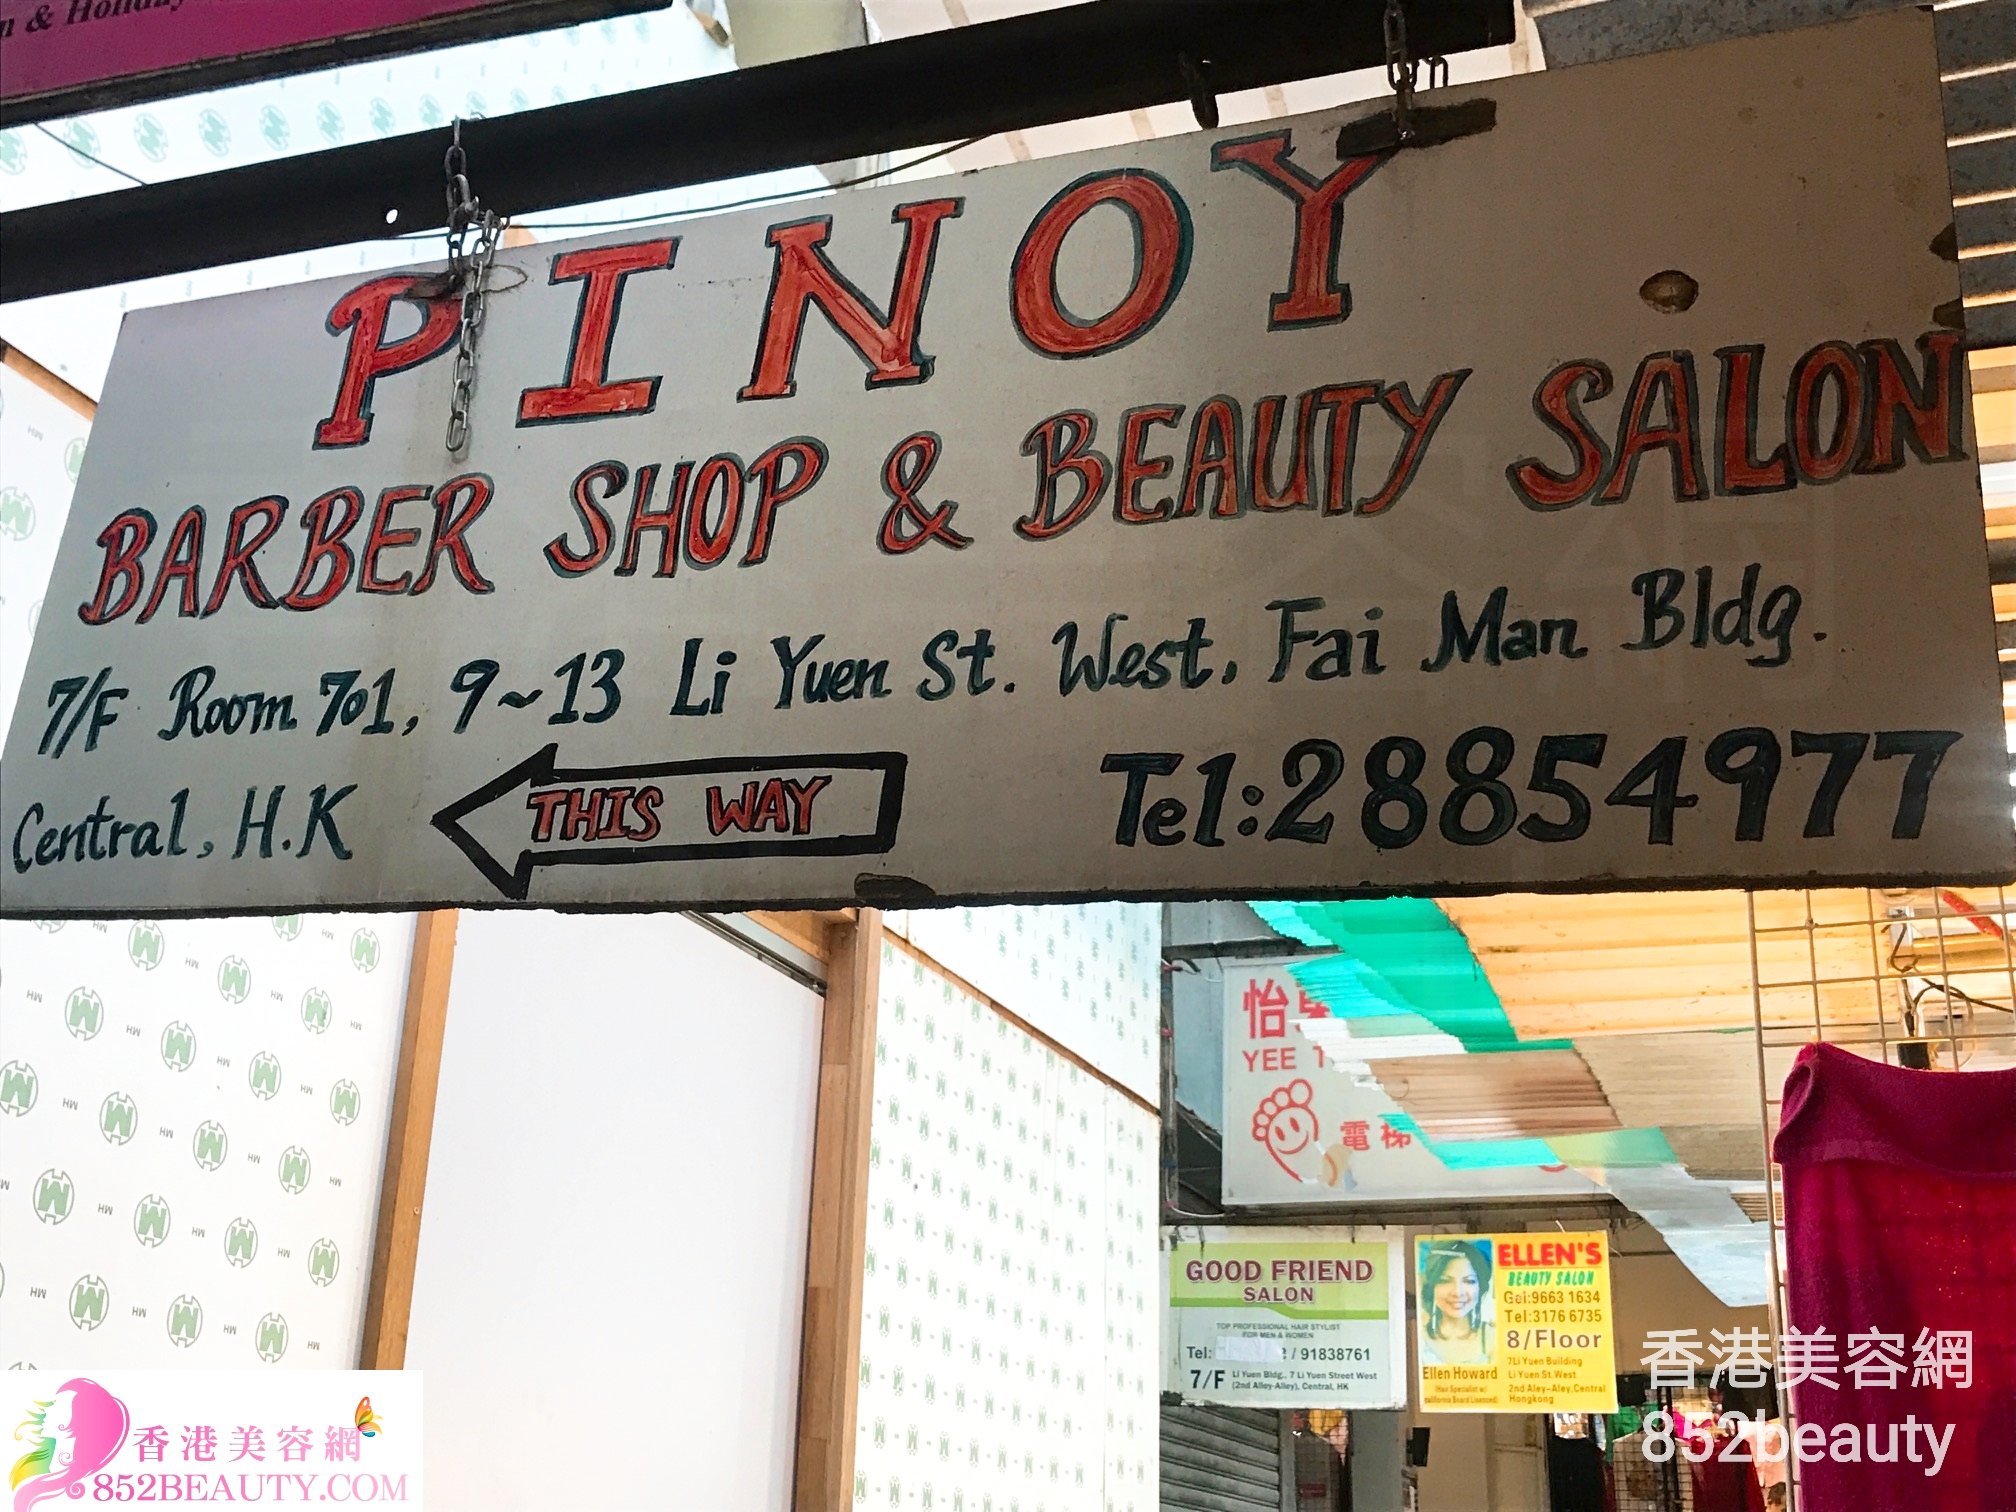 Hand and foot care: Pinoy Beauty Salon